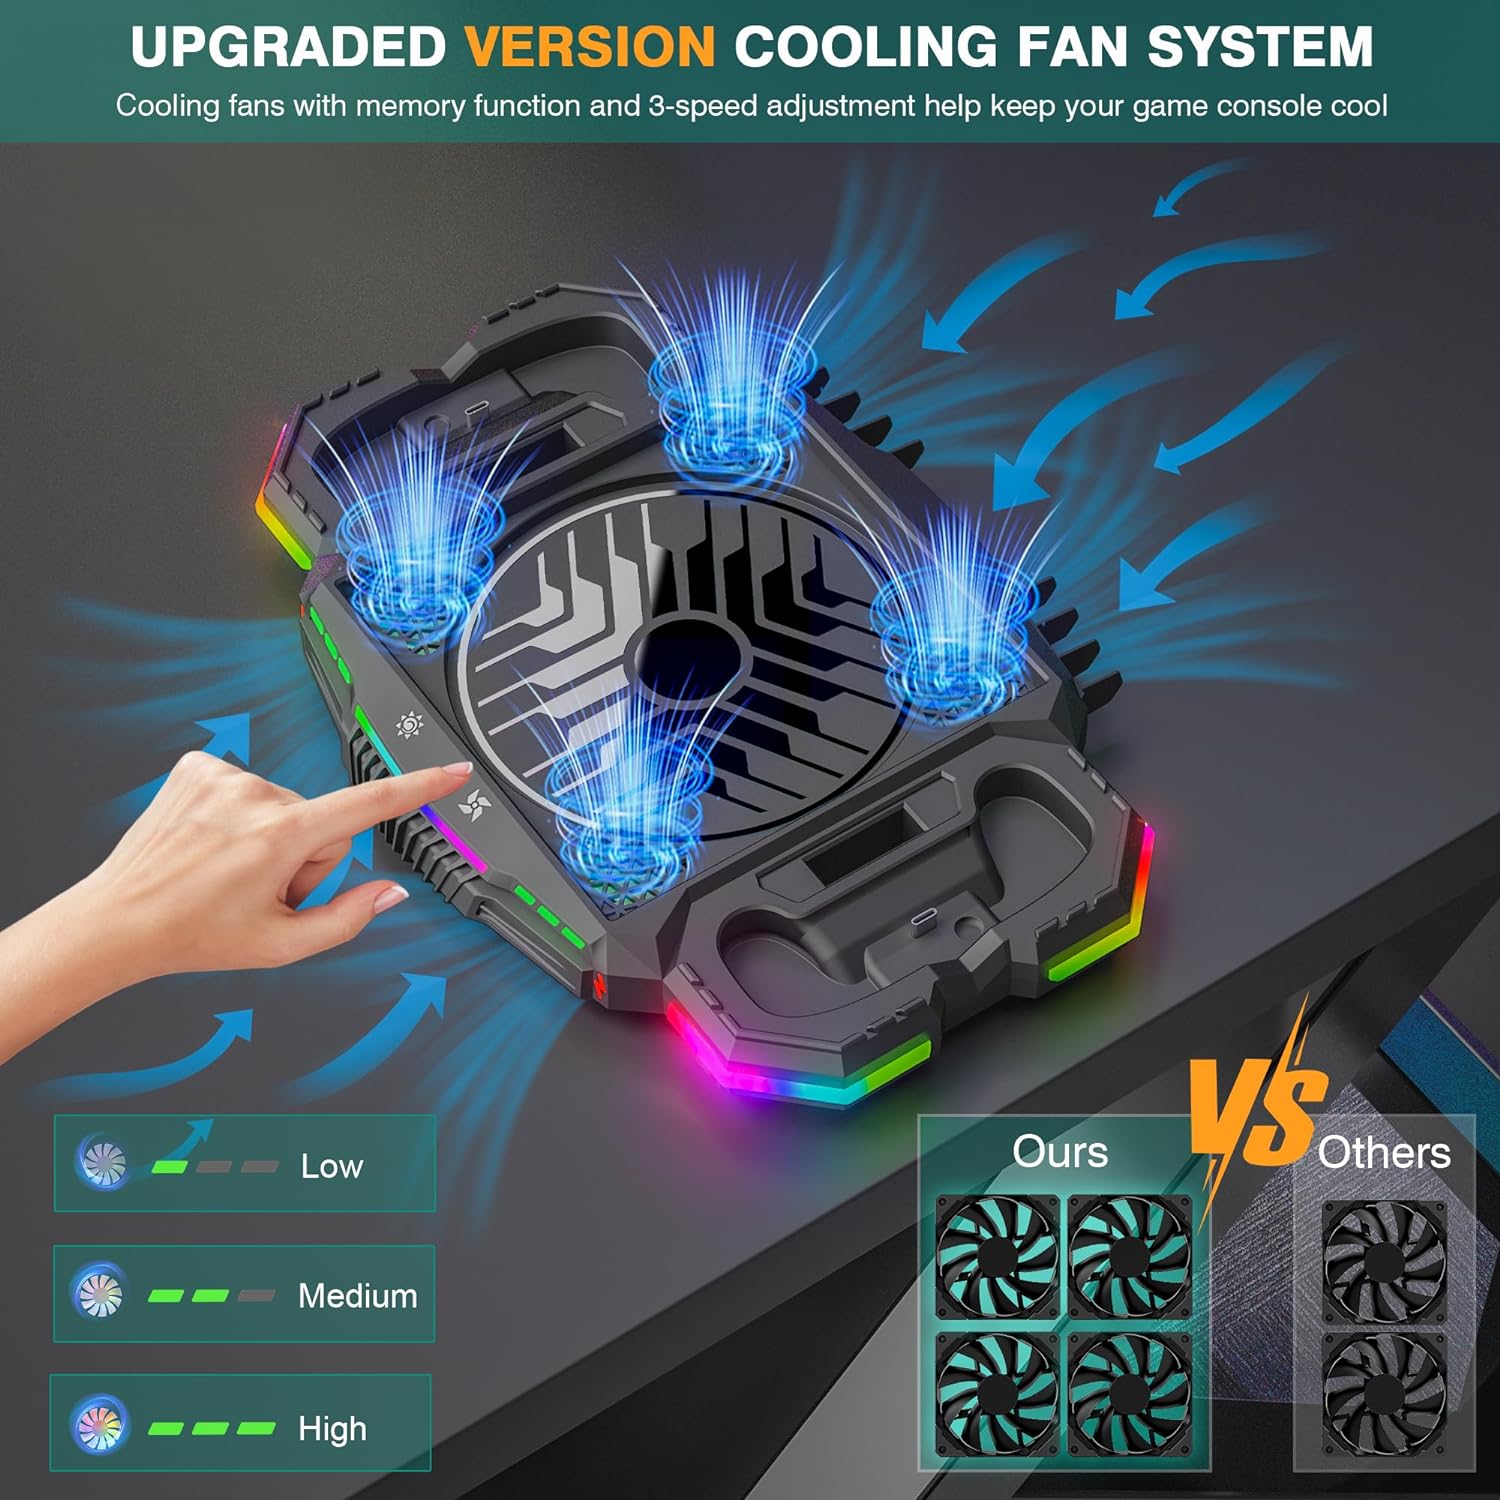 Wiilkac Vertical Cooling Fan Stand and Dual Controller Charging Station for Xbox Series X with RGB Color Lights/USB Ports, 3-Level Fan Cooling System with 2 * 1400 mAh Rechargeable Battery